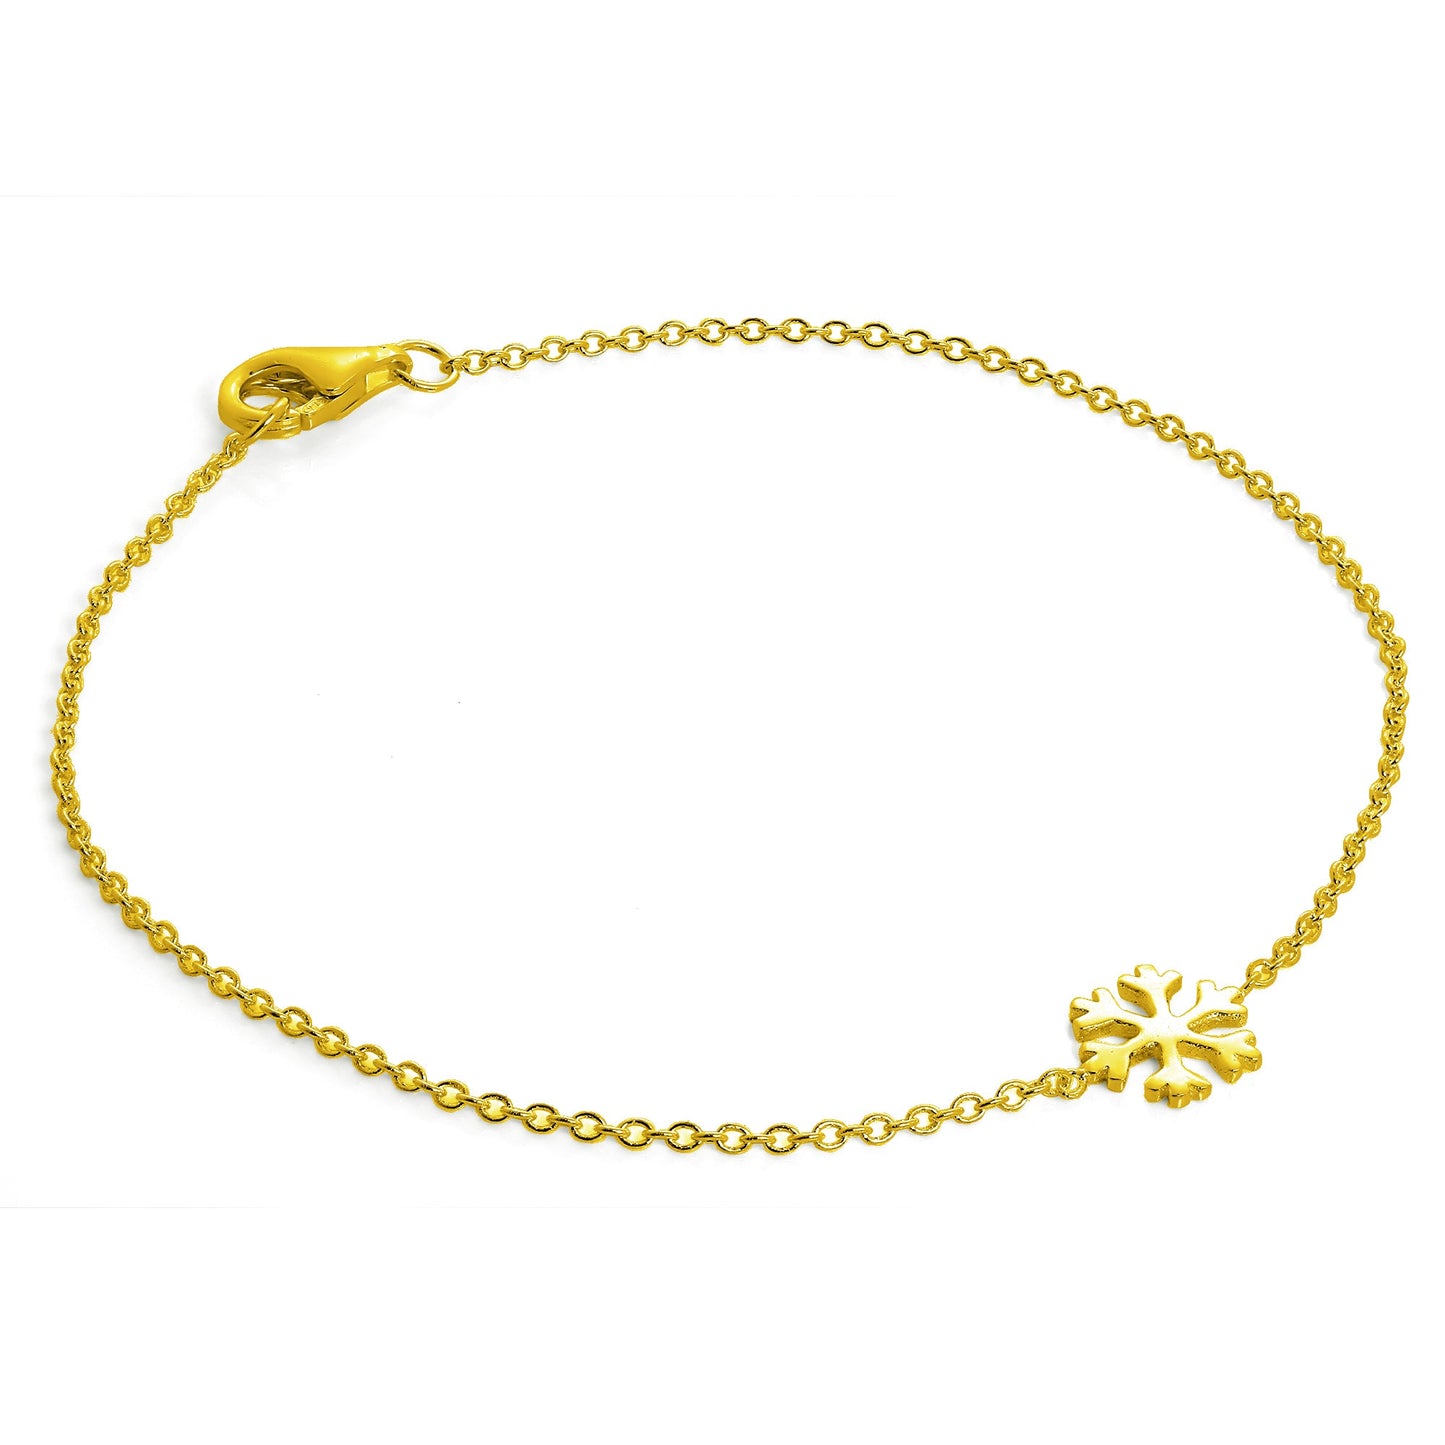 Gold Plated Sterling Silver Snowflake Bracelet - 7 Inch